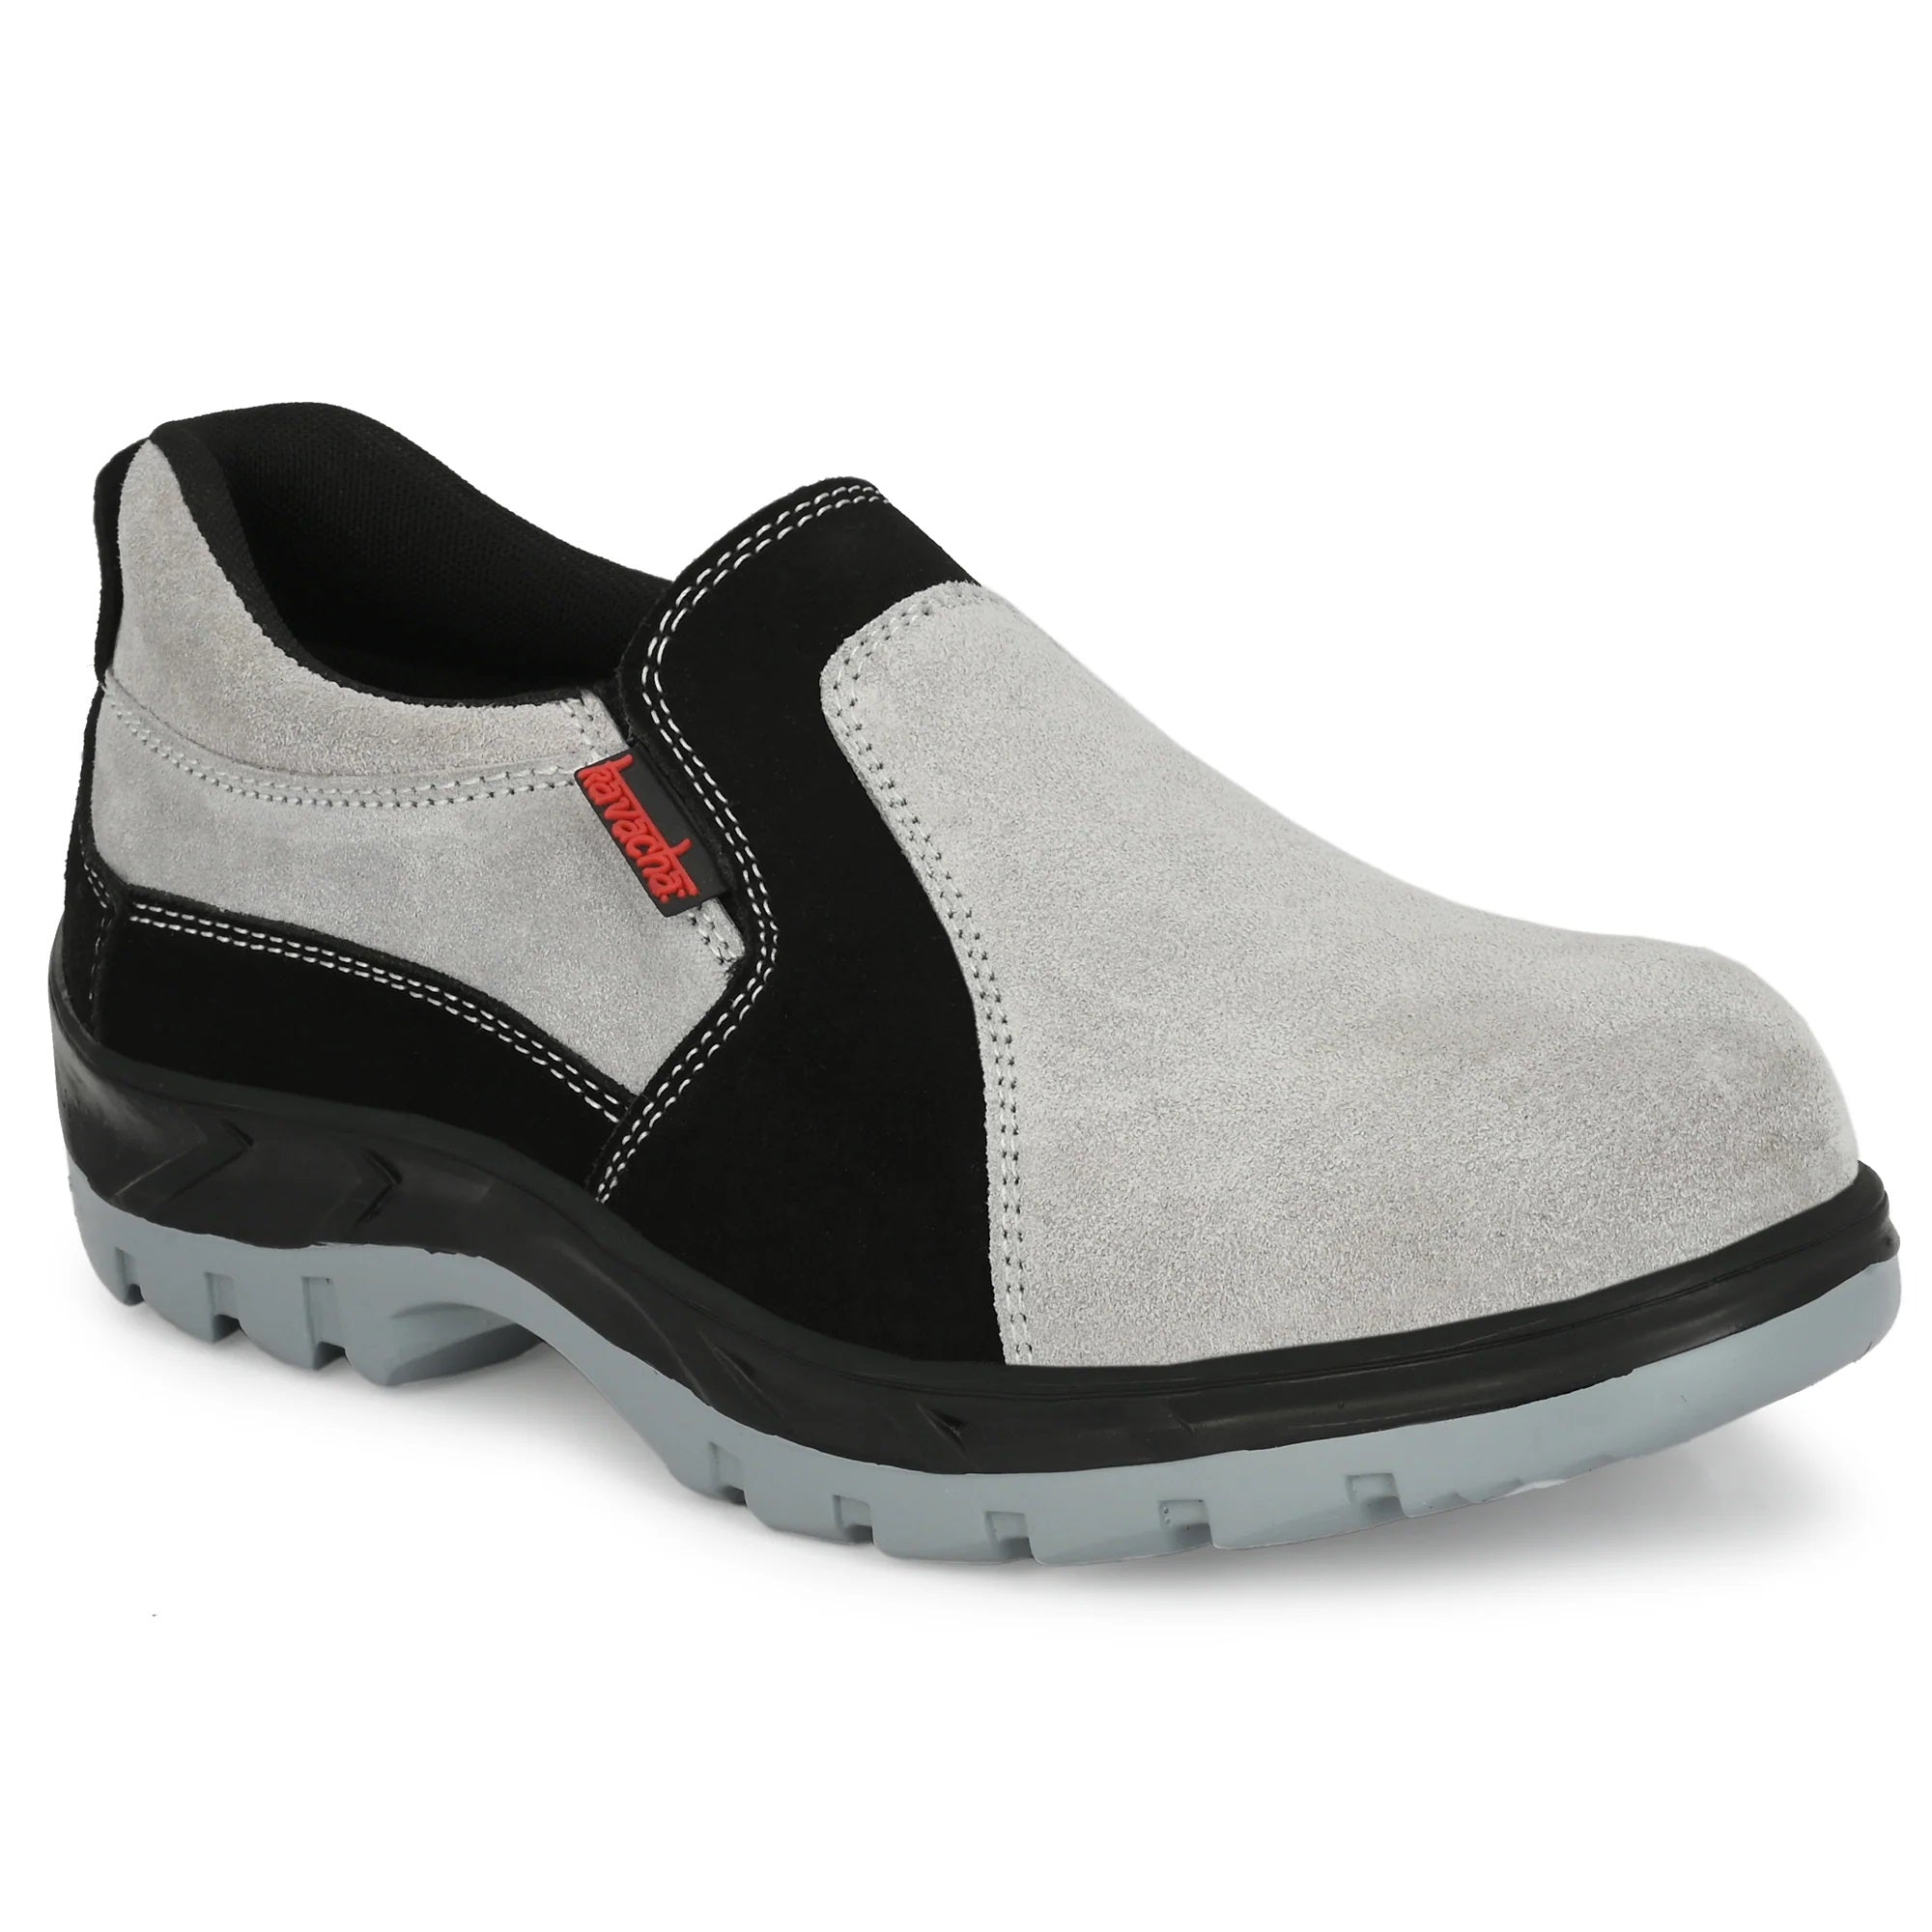 Kavacha Suede Leather Upper and Airmix Sole Steel Toe Safety Shoe S126